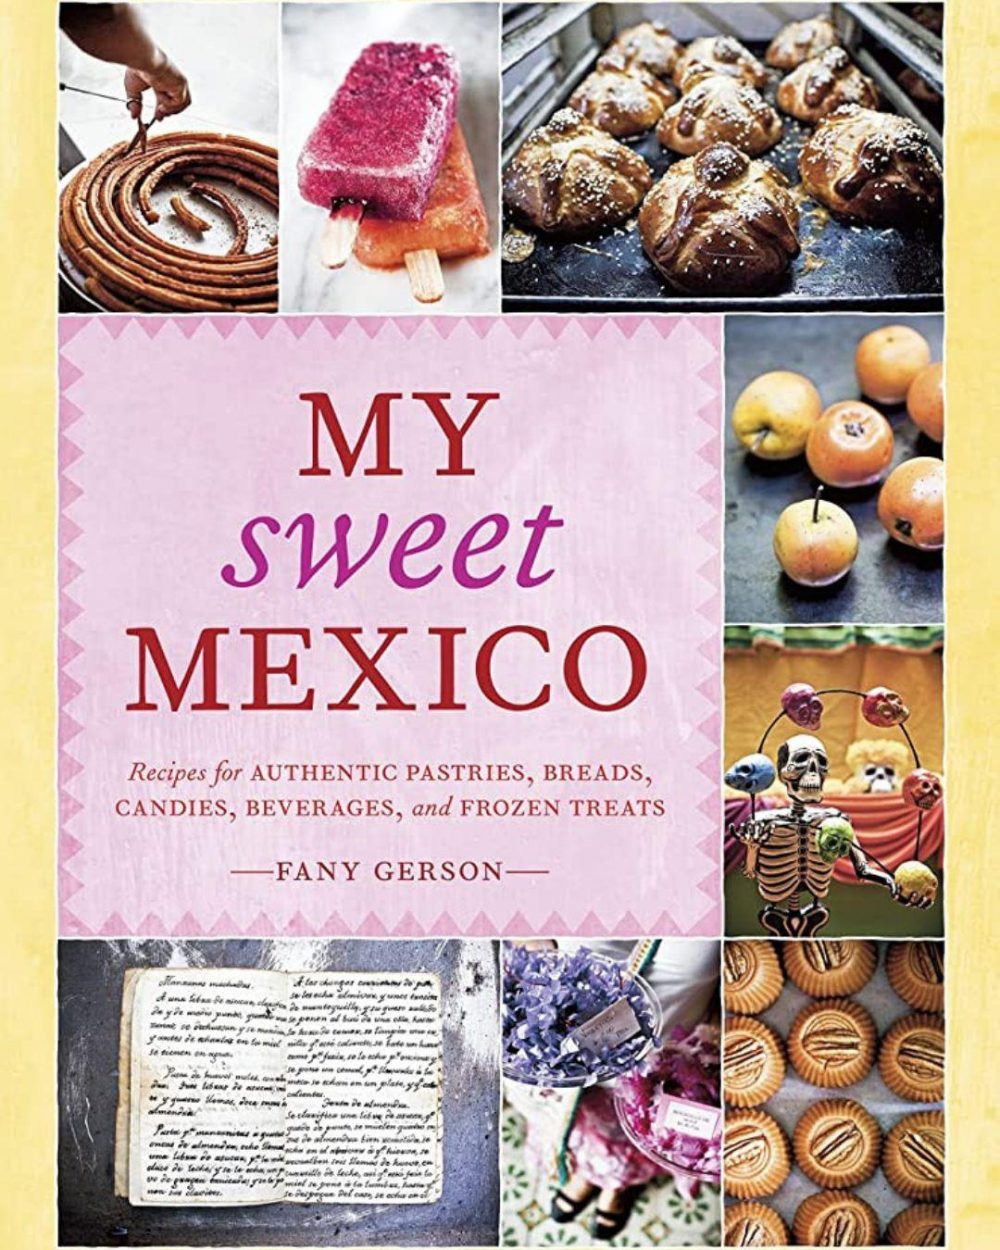 My Sweet Mexico Blog Book Review